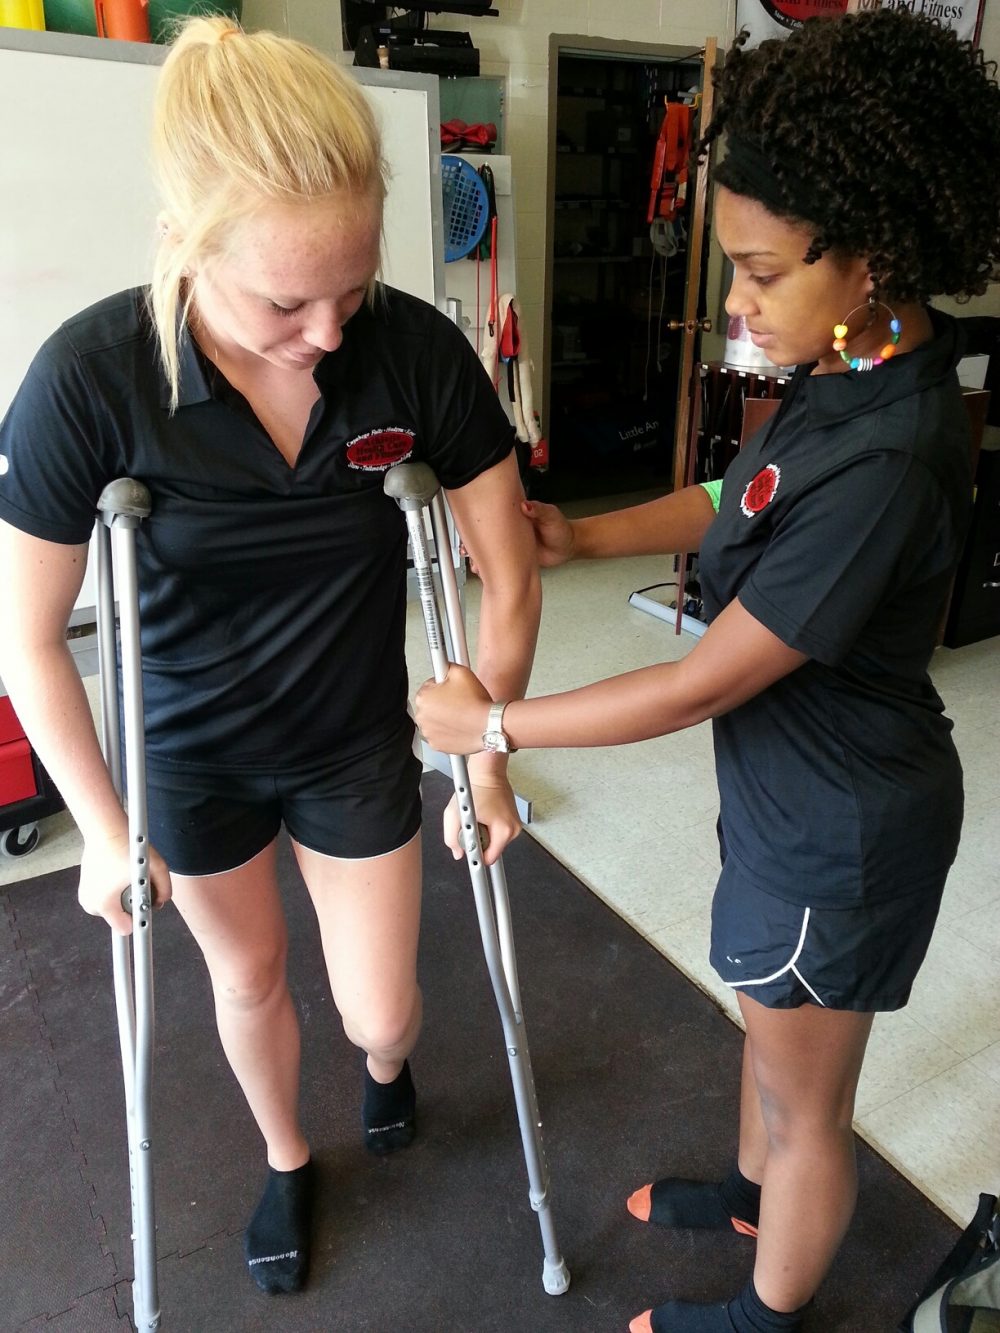 A student working with crutches